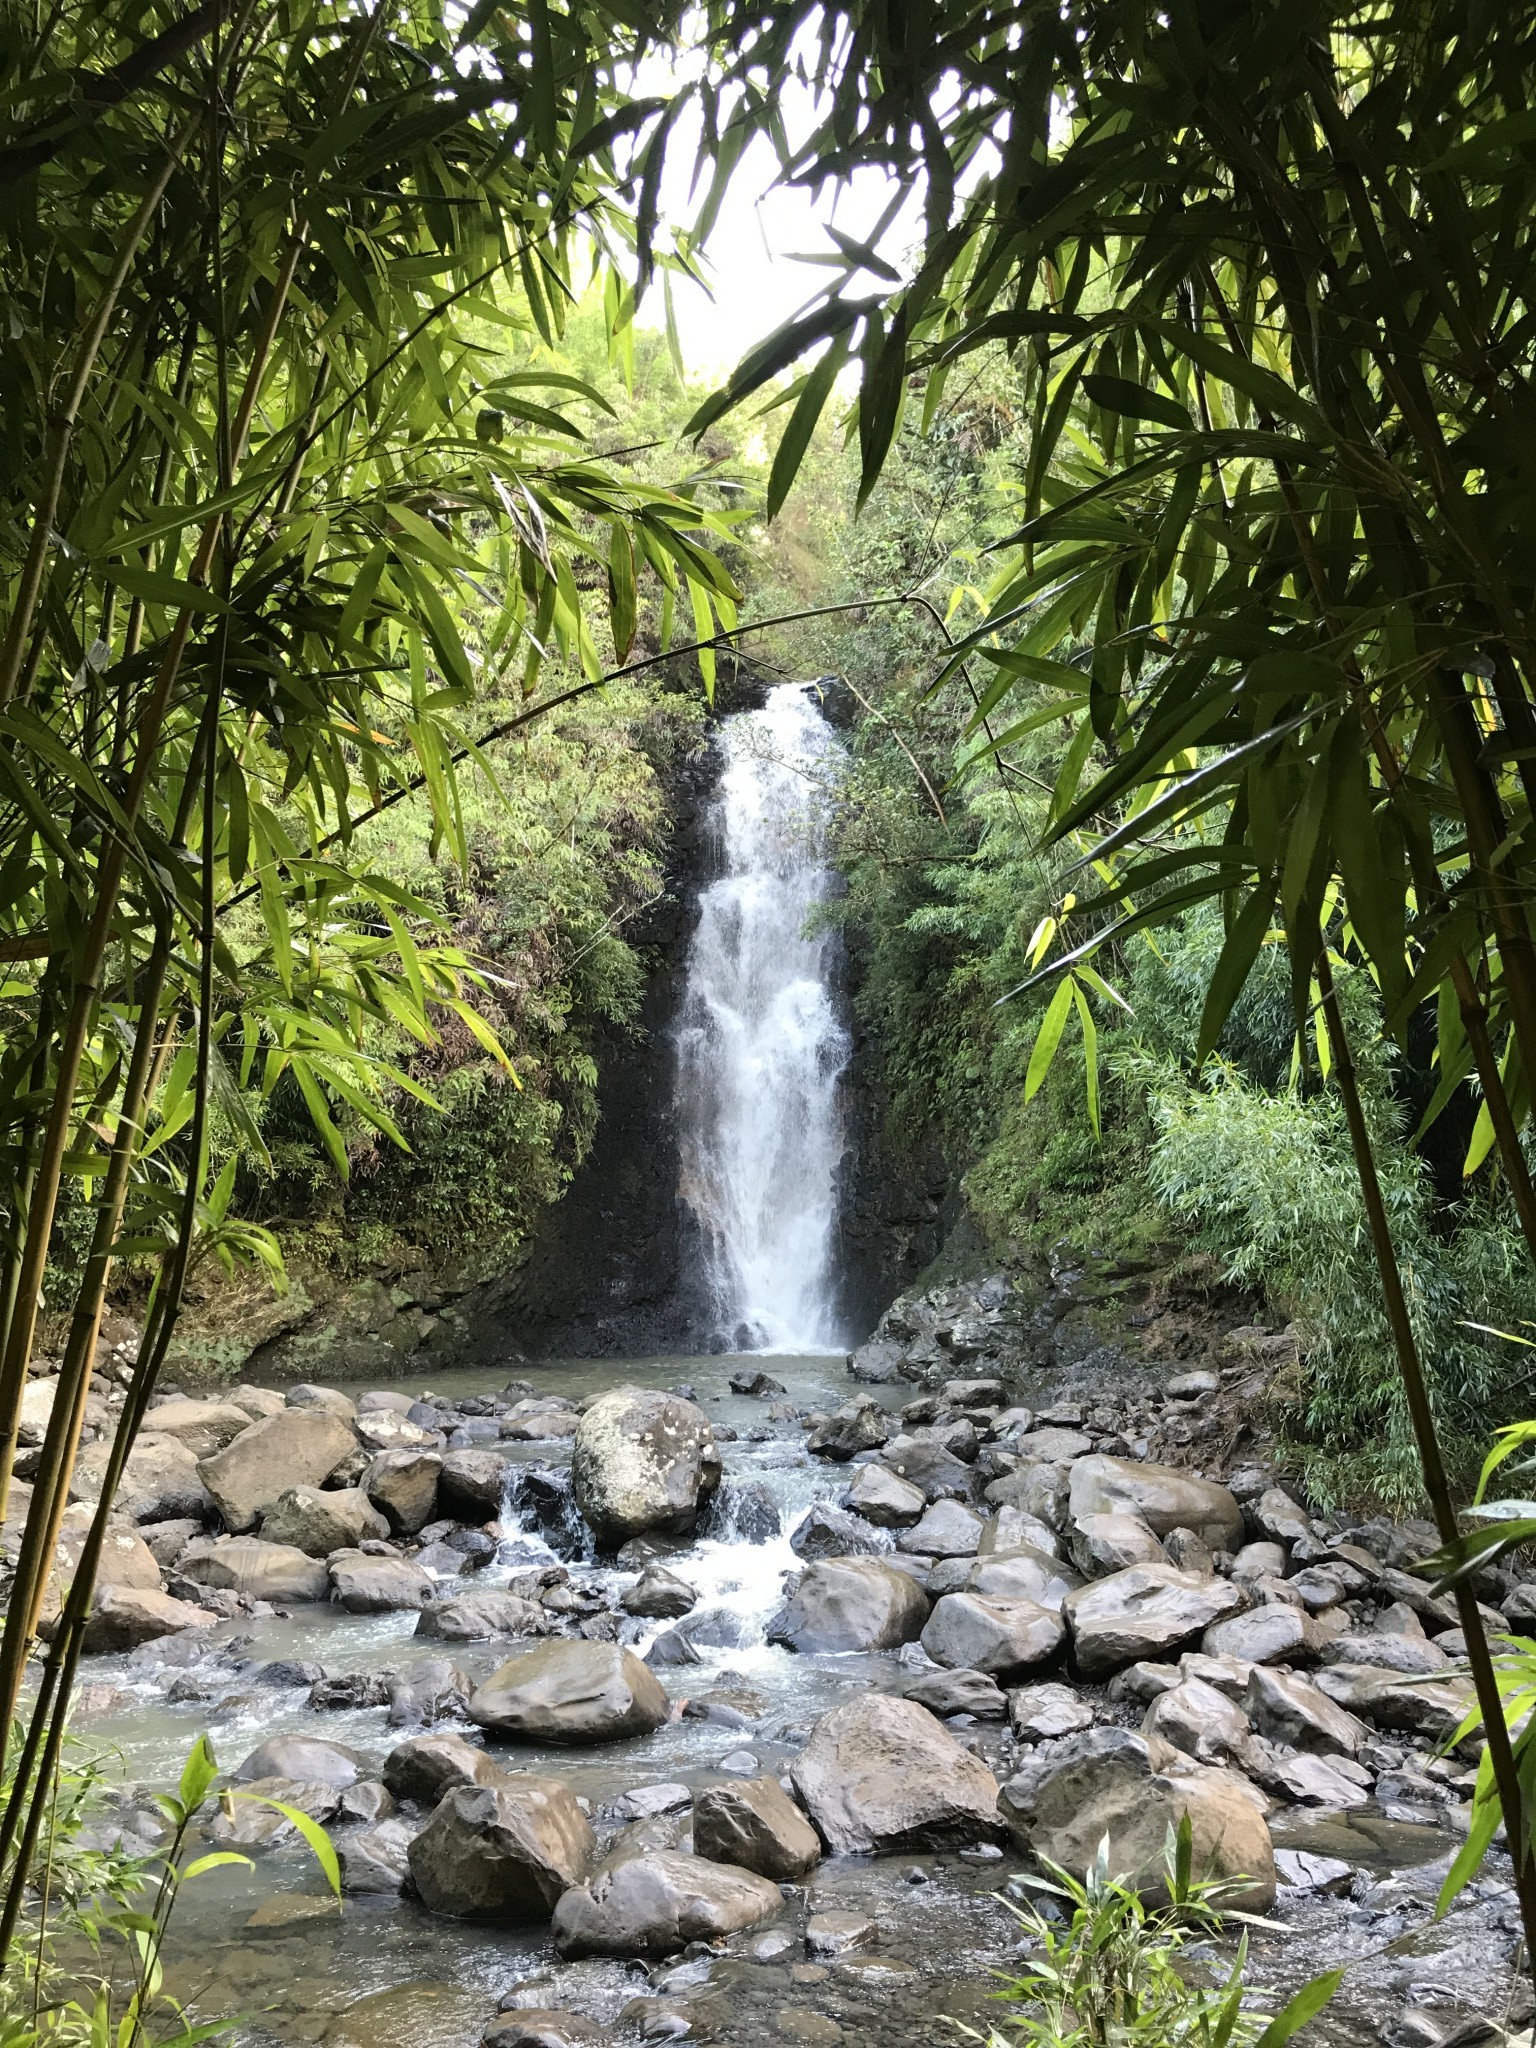 Bamboo Forest: Na'ili'ili Haele trail - off the beaten path - See 170 traveler reviews, 200 candid photos, and great deals for Maui, HI, at TripAdvisor. four waterfalls of Na'ili'ili - Maui Forum - TripAdvisor https://www.tripadvisor.com › ... › Hawaii (HI) › Maui › Maui Travel Forum Answer 1 of 11: My fiance and I leave for Hawaii in a couple weeks (!). I was wondering if people have hiked the four waterfalls of Na'ili'ili, I did a search, but didn't find many results. It sounds pretty amazing, accoring to Maui Revealed, but... Maui Hiking: Bamboo Forest & Na'ili'ili-Haele Falls (HD) - YouTube Video for na'ili'ili haele▶ 3:24 https://www.youtube.com/watch?v=O4HK07g_NMA Nov 14, 2011 - Uploaded by nguyent27 A beautiful & serene hike through a bamboo forest and the four falls of Na'ili'ili-Haele on the road to Hana ... Hiking (& Plunging) in Hawaii's Bamboo Forest: the Na'ili'ili-Haele in ... https://www.outdoorwomensalliance.com/hiking-plunging-in-hawaiis-bamboo-forest-... My husband Josh and I recently made a leap from living in Canada to island life in Hawaii and as such, were in need of finding adventure in this completely new climate and landscape. Luckily, our friend Alexis knew where to take a pair of newbies. Introducing: the Bamboo Forest at Na'ili'ili-Haele stream in Maui. This hike ... Images for na'ili'ili haele Image result for na'ili'ili haele Image result for na'ili'ili haele Image result for na'ili'ili haele Image result for na'ili'ili haele Image result for na'ili'ili haele More images for na'ili'ili haele Report images Na'ili'ili-haele Four Waterfalls Hike (KAPU) | Maui Hawaii https://www.hawaii-guide.com › Maui › Maui Hiking Trails Oct 12, 2017 - You might read about this spot online or in another guidebook. A half-mile beyond the 6 mile marker a trail leads mauka to four different falls. The spot should be considered Kapu, or off-limits. It's located on private EMI property. EMI is the East Maui Irrigation company, and they have ditches running most of ... Road to Hana Waterfalls - Maui - FreeTravelGuys freetravelguys.com/travel-reviews/road-to-hana-waterfalls-review/ Jul 25, 2013 - We managed to visit Haipua'ena Falls, Lower Puohokamoa Falls, and Na'ili'ili-haele Falls. We traveled with the kids (7 & 4) and since we had already been to Hana, we opted to take a different approach of driving to the farthest fall that we wanted to visit and work our way back. First was Haipua'ena Falls ... Tips for Hiking Na'Ili'Ili-Haele (Bamboo Forest) – Maui - The Tattered ... www.tatteredbackpack.com/destinations/hiking-the-bamboo-forest-maui/ Oct 28, 2014 - The incredibly beautiful Na'Ili'Ili-Haele hike AKA Bamboo Forest is a Maui hidden gem, giving you a chance to experience the surreal beauty that Maui has to offer. You'll journey through a bamboo veil, which opens up into lush jungle, fresh water swimming holes, and a number of amazing waterfalls. Itinerary Question - Wailea to Na'ili'ili Haele Stream - Maui ... https://www.tripadvisor.co.za › ... › Hawaii (HI) › Maui › Maui Travel Forum Jan 6, 2017 - Answer 1 of 10: On google maps it says the drive time from Wailea to Na'ili'ili Haele Stream & Waterfalls is approx 1 hr and 5 mins...Can someone confirm if this sounds about right? My intention is to drive to Paia for breakfast from Wailea...then... Searches related to na'ili'ili haele na'ili'ili haele mile marker na'ili'ili haele falls maui bamboo forest maui directions bamboo forest haleakala national park maui bamboo forest maui trail map lower puohokamoa falls na ili ili haele waterfall bamboo forest hawaii oahu 1 2 3 4 5 6 7 8 9 10 Next See photos Map of Na'ili'ili-haele Stream & Waterfallmap expand icon See outside Directions Na'ili'ili-haele Stream & Waterfall, road to hana, the-alyst.com